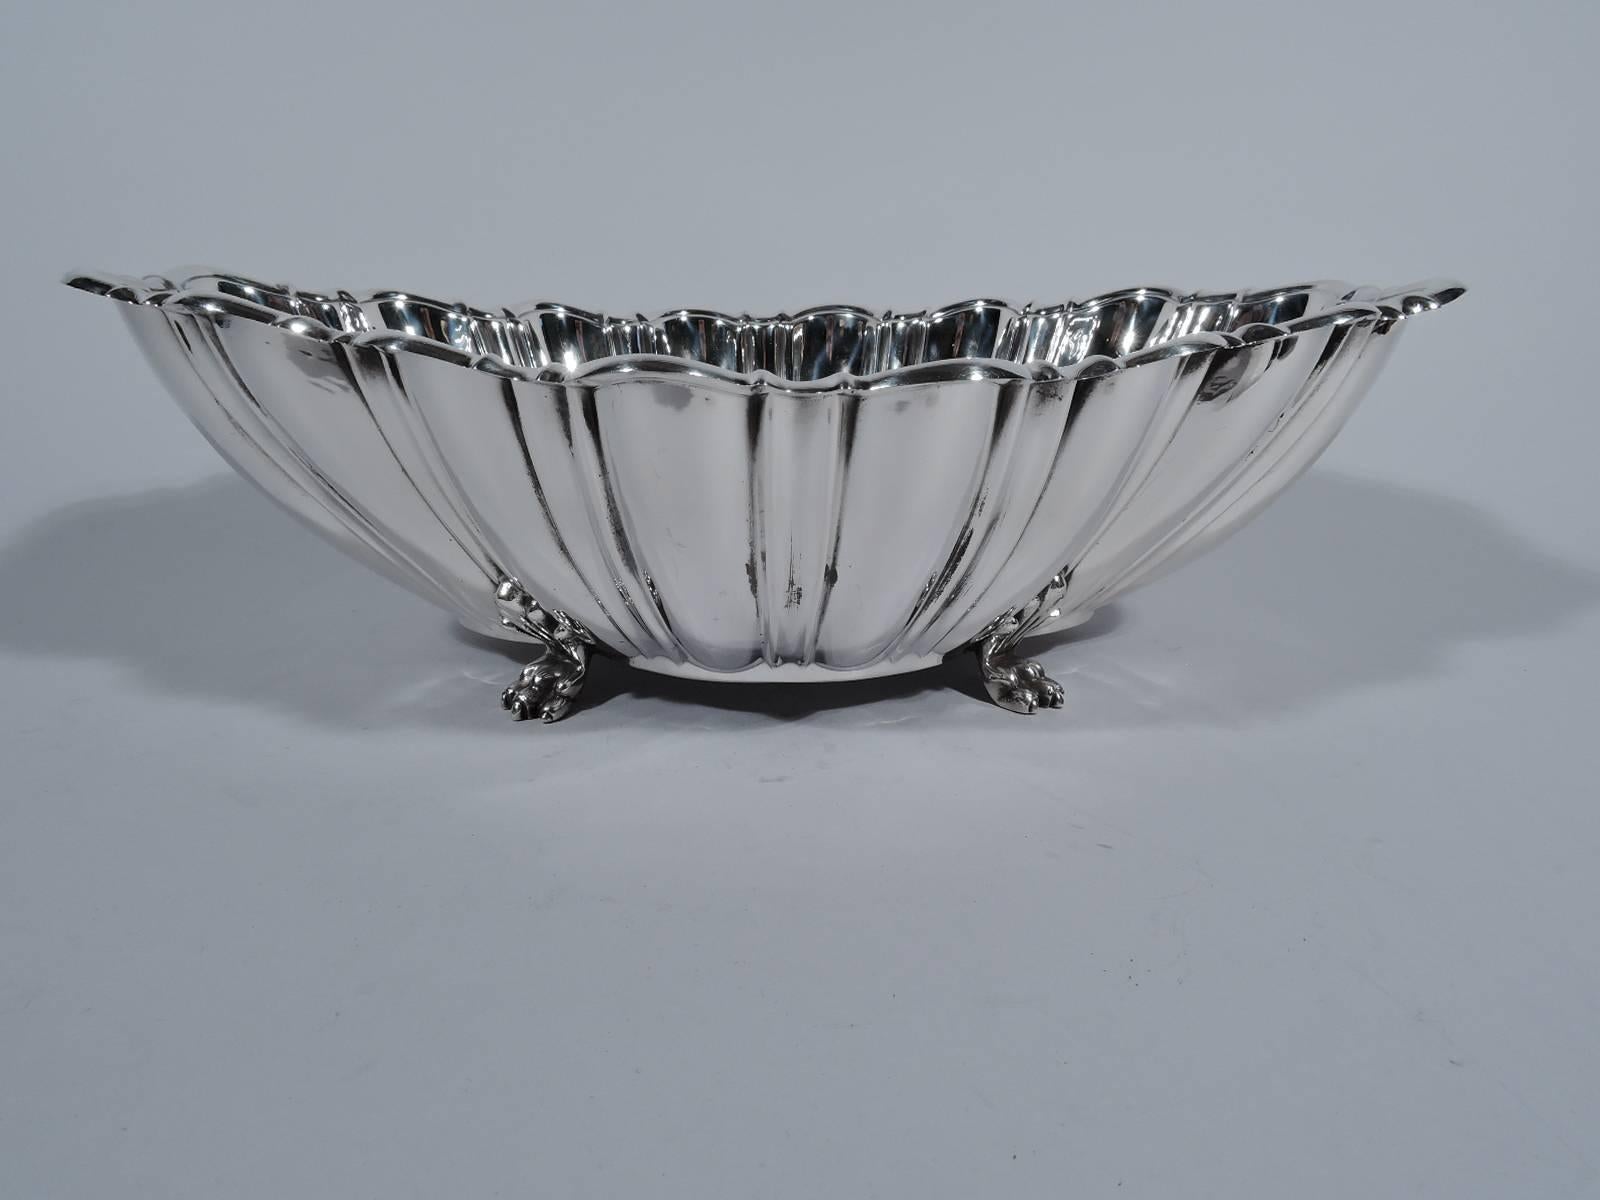 Modern Classical sterling silver centrepiece bowl. Made by Reed & Barton in Taunton, Mass. Quatrefoil well. Curved sides with alternating flutes and lobes. Scrolled rim. Rests on four paw supports with palmette mounts. A great revving up of